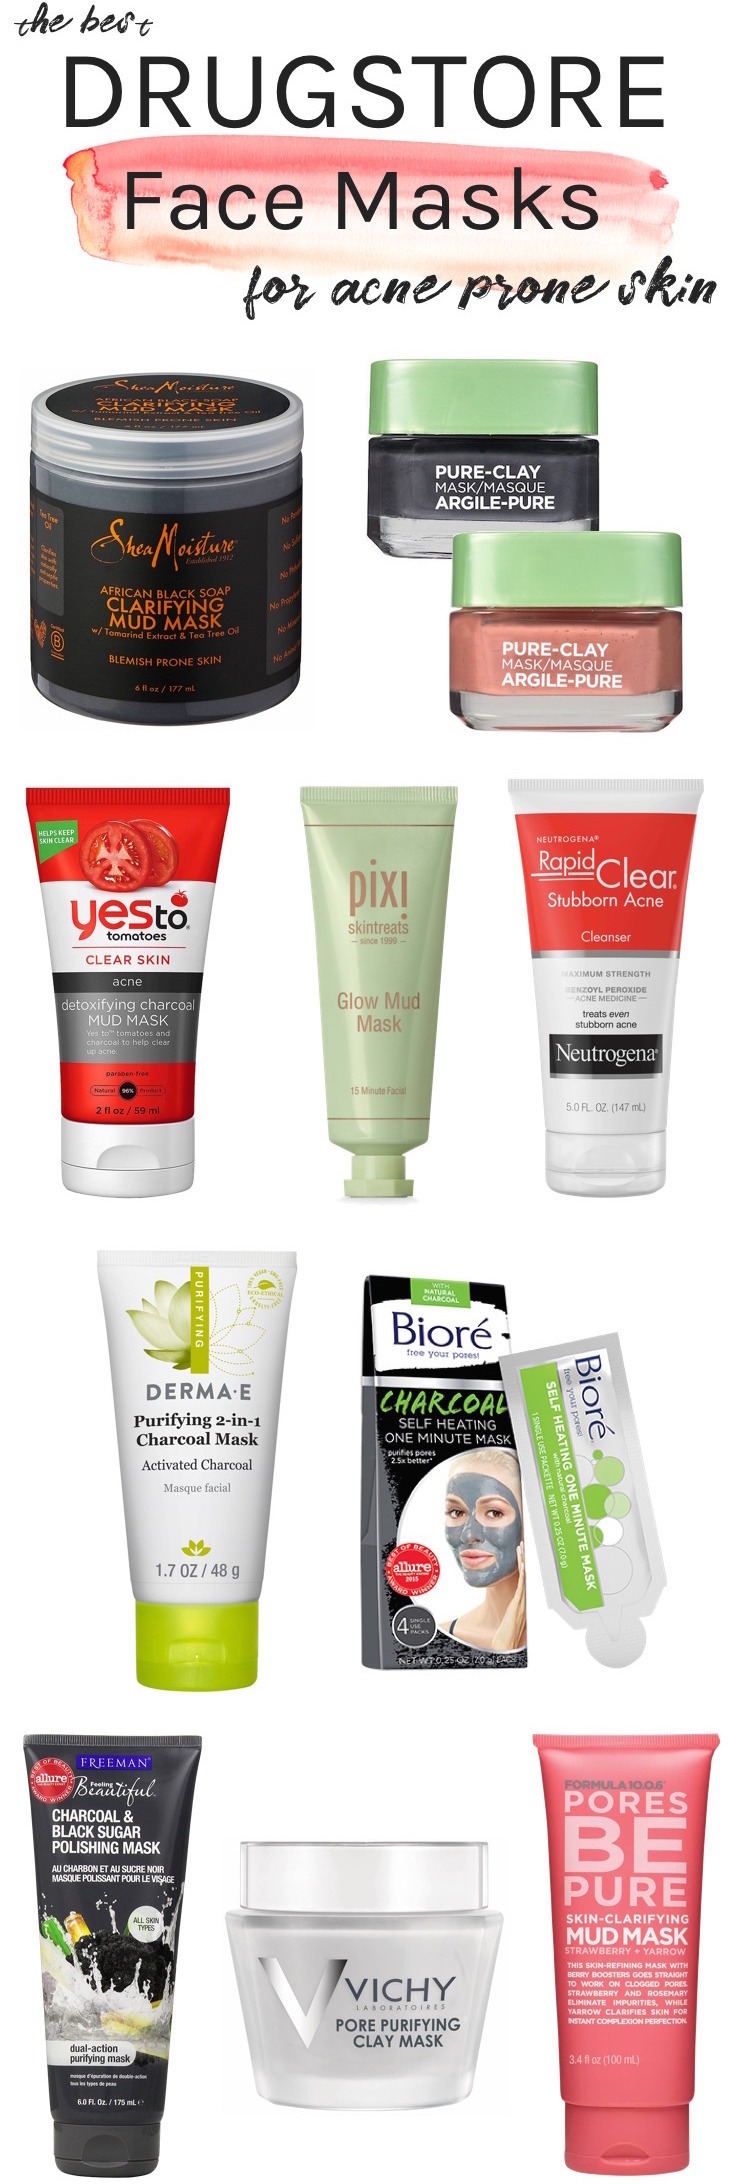 Whether you're battling breakouts, clogged pores or dullness, here are the best drugstore face masks for acne prone skin that can help you get clear skin without costing a pretty penny!